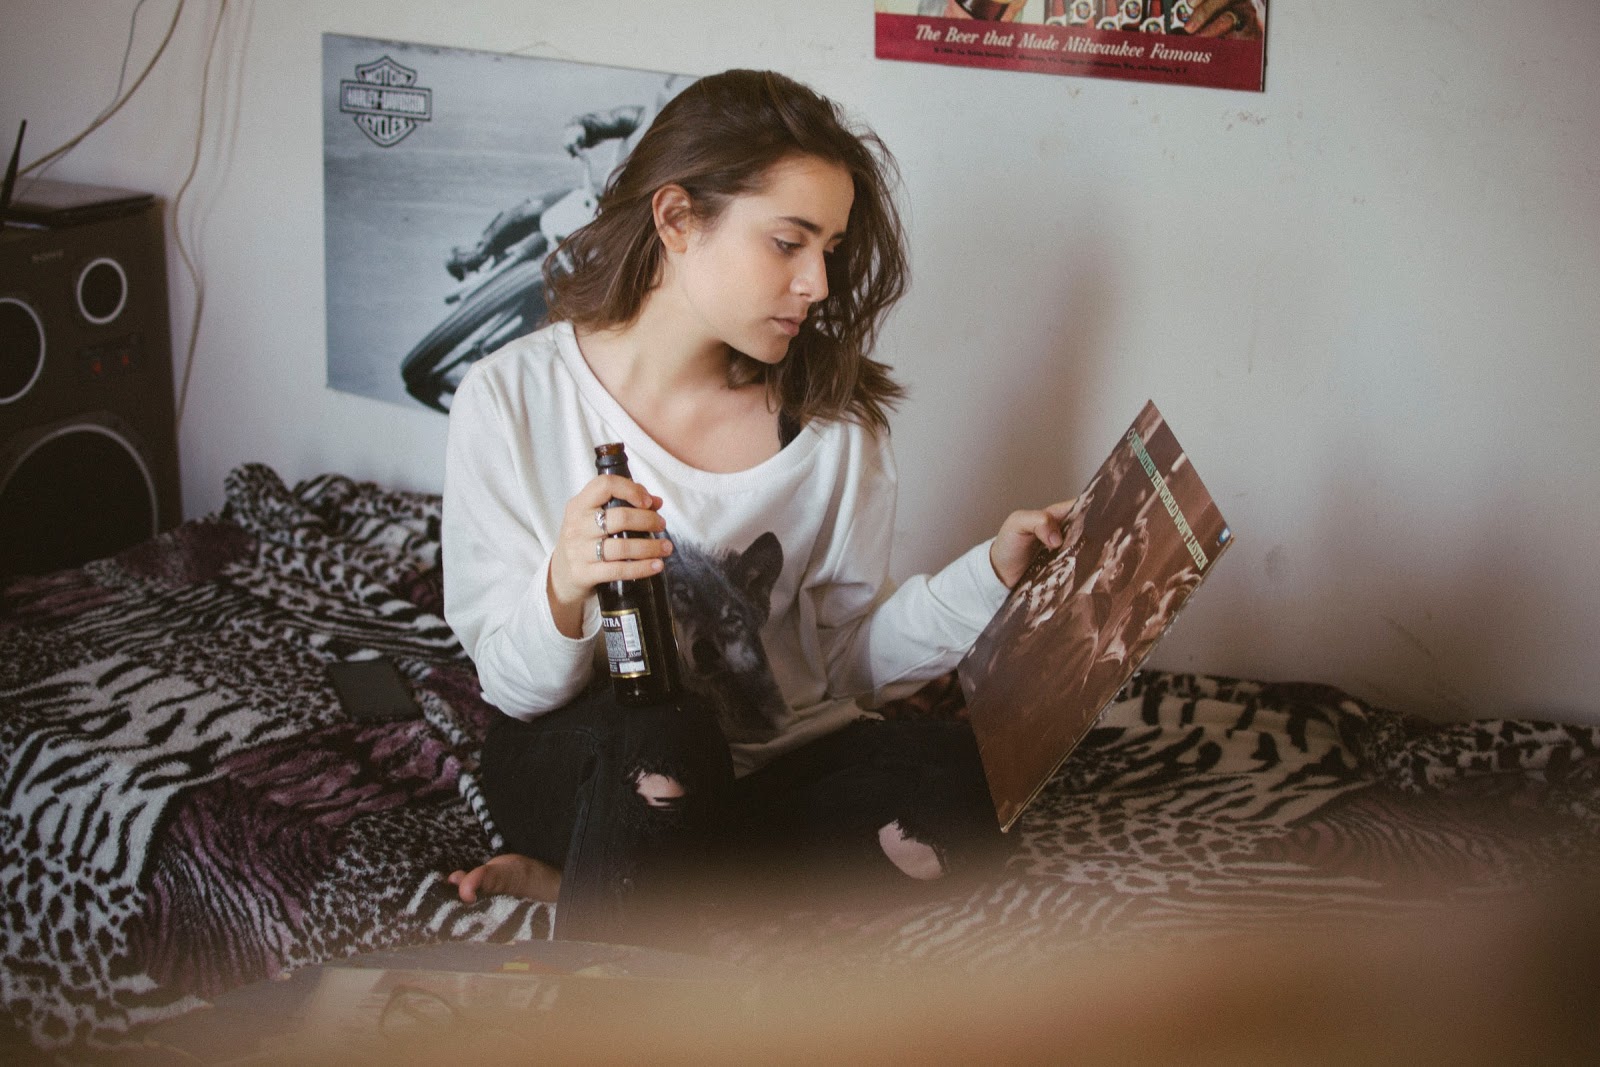 Teen Girl Drinking on Bed